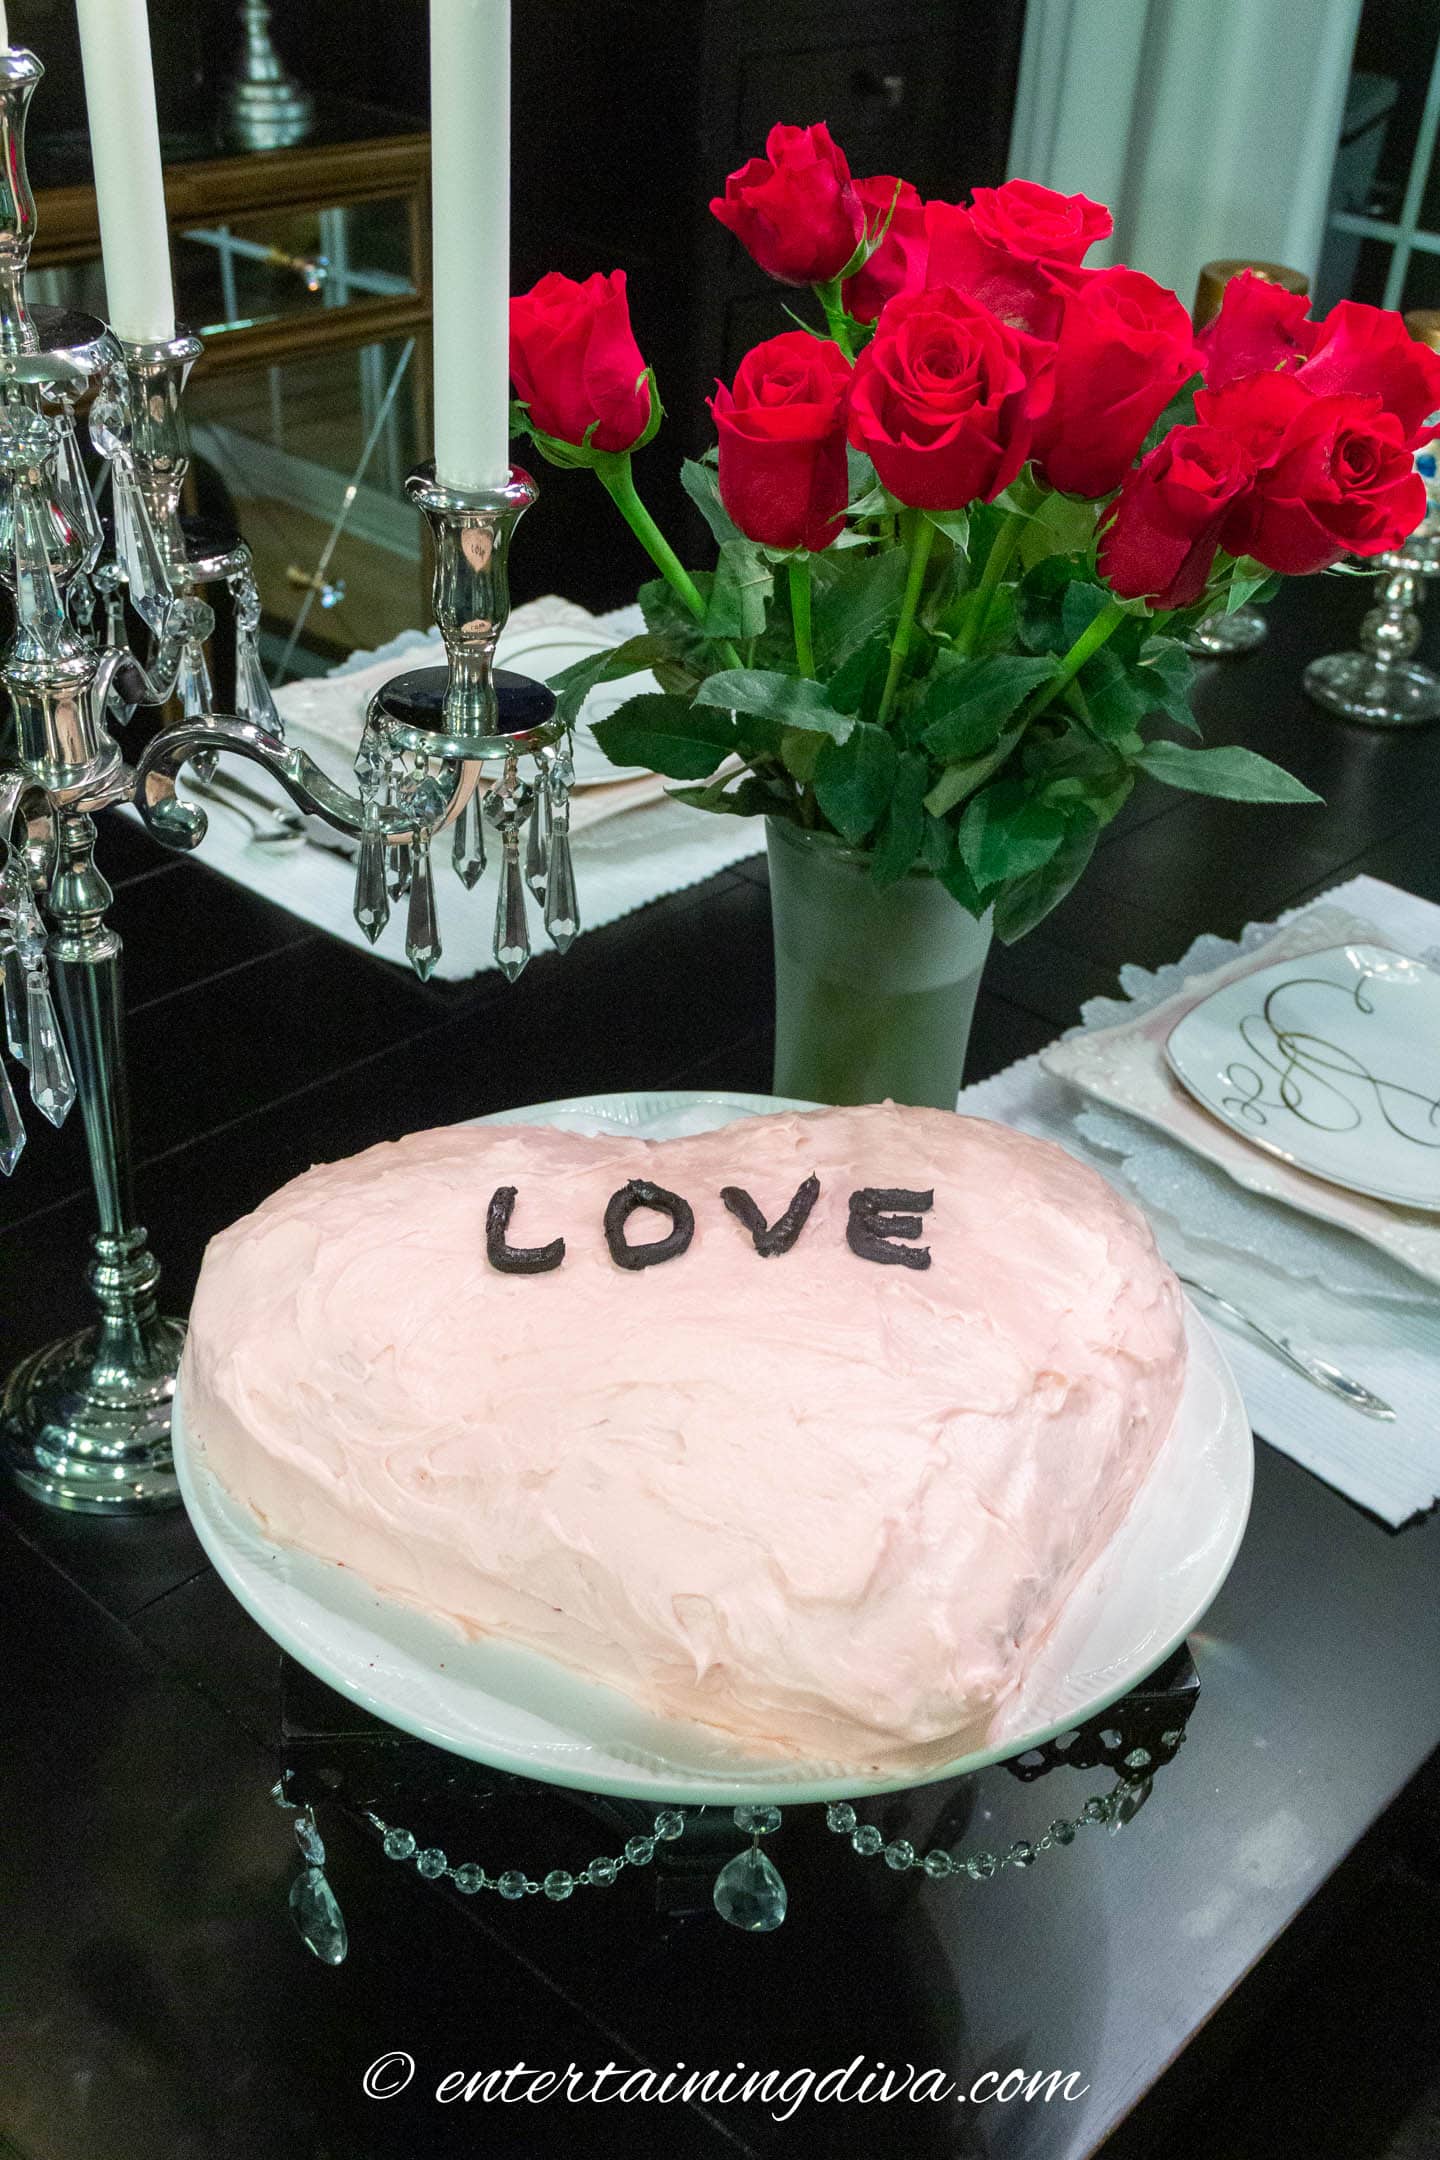 Valentine's Day table with red roses and pink cake with the word LOVE on it